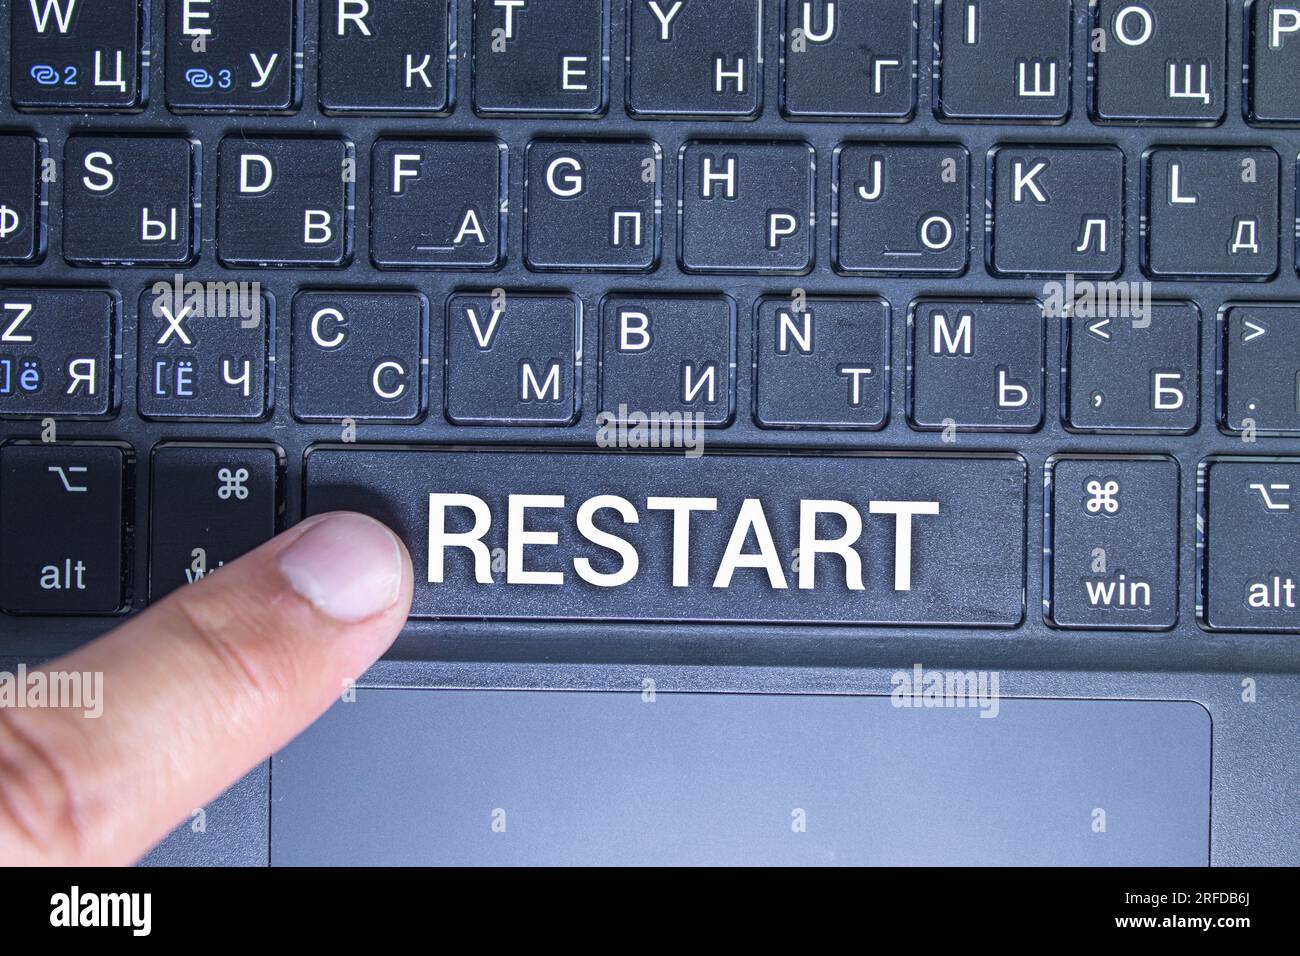 A keyboard with a labeled button - Restart. Stock Photo